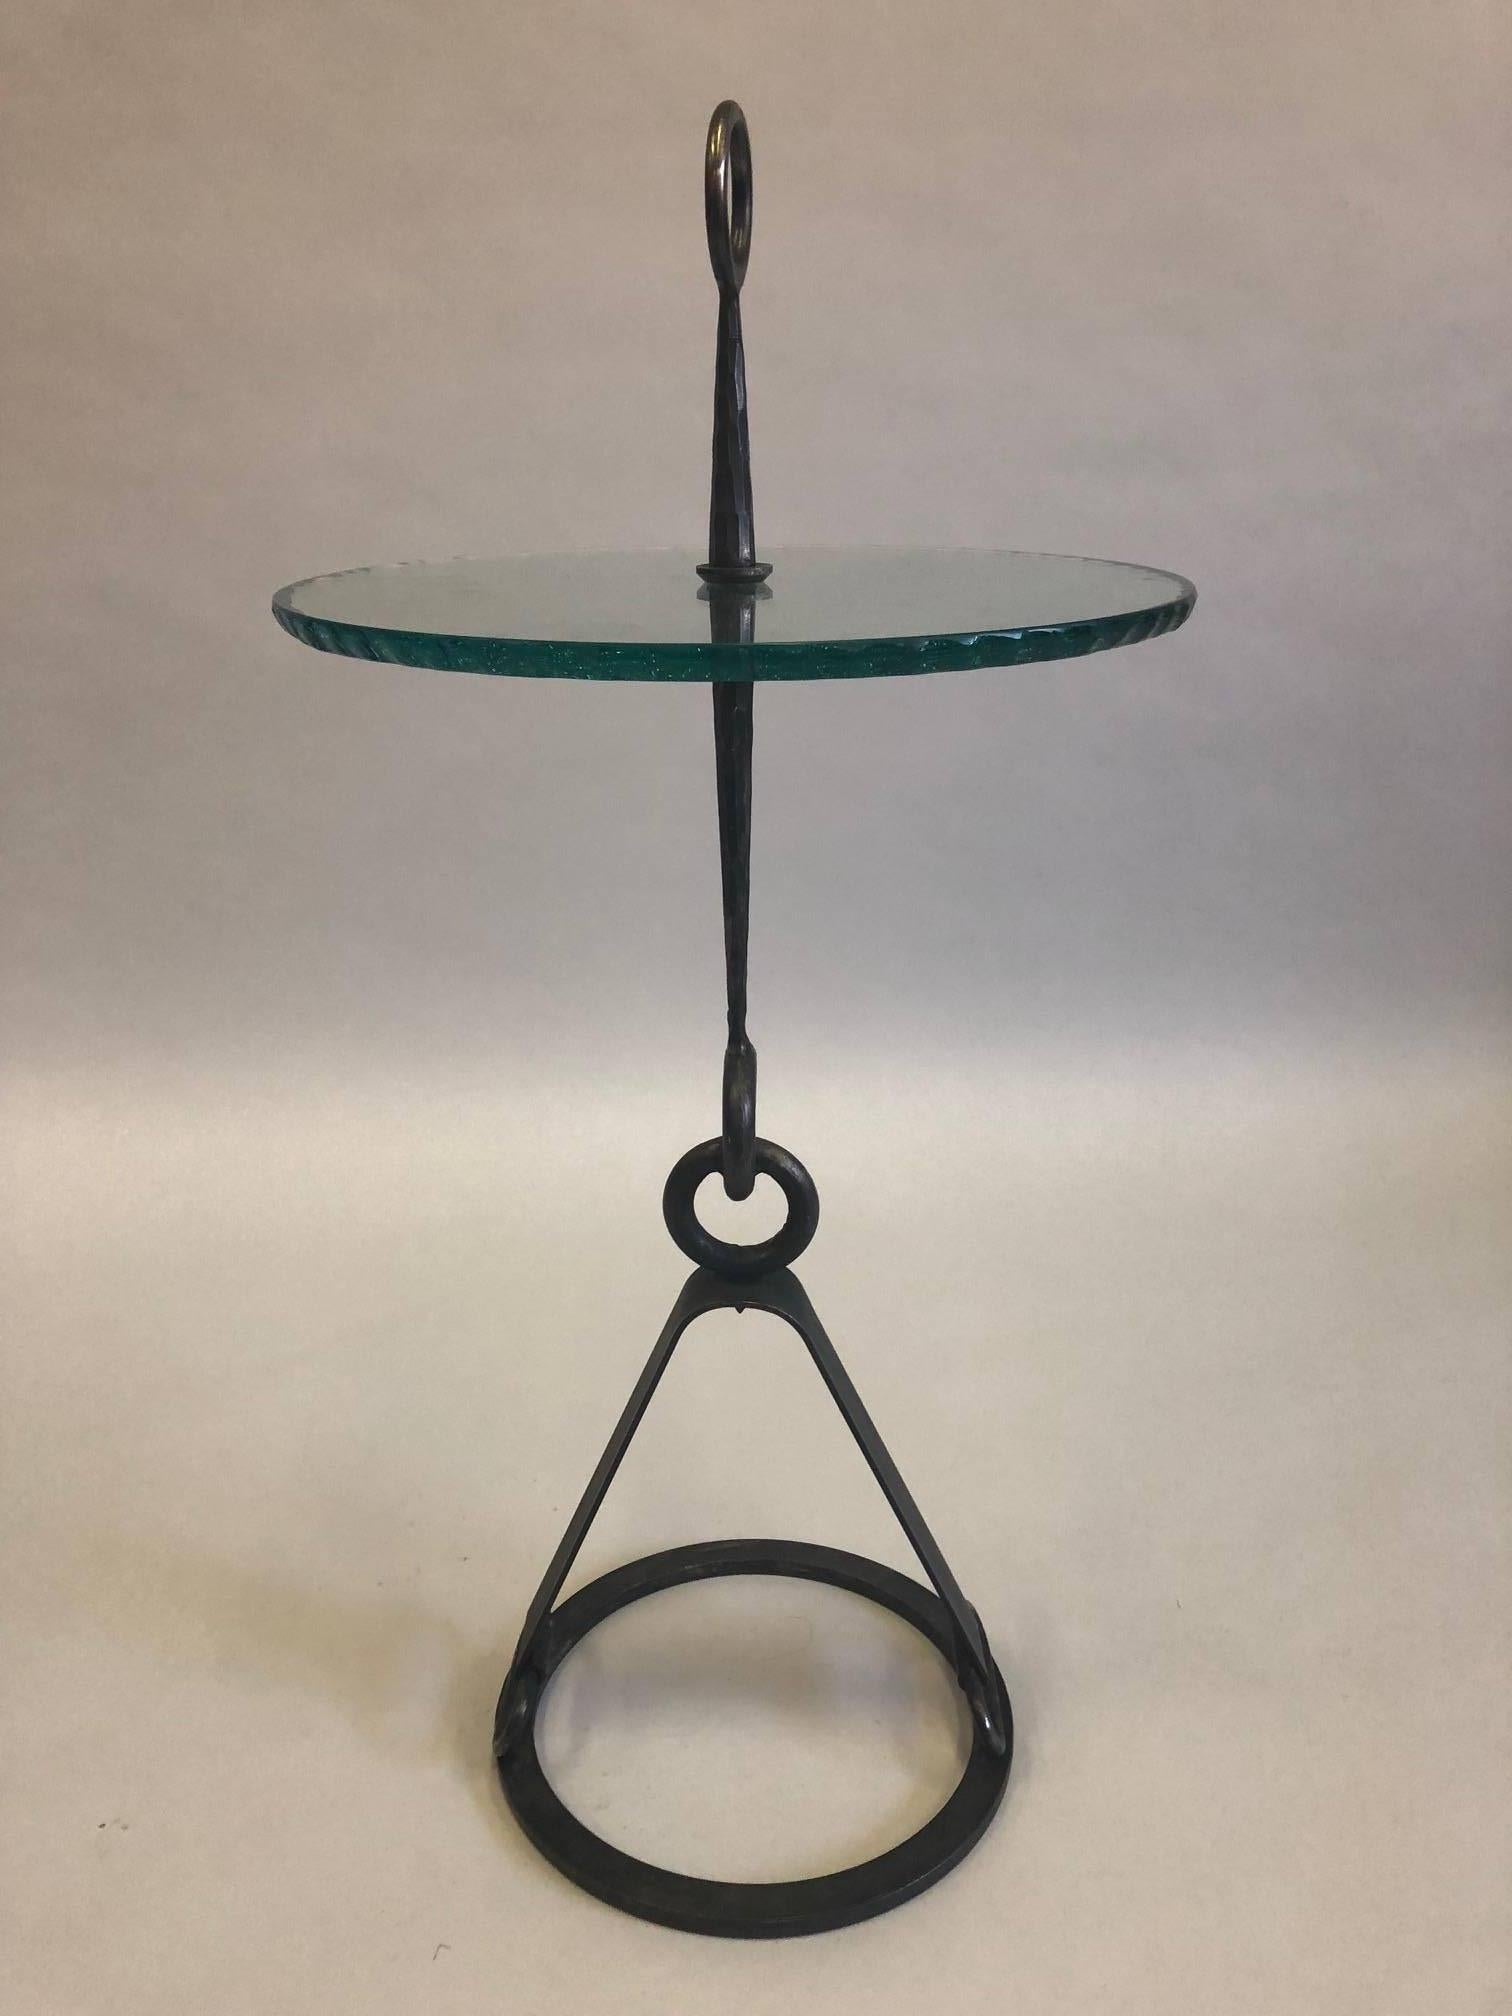 Italian Pair of Modern Neoclassical Wrought Iron Side Tables, Giovanni Banci and Hermes